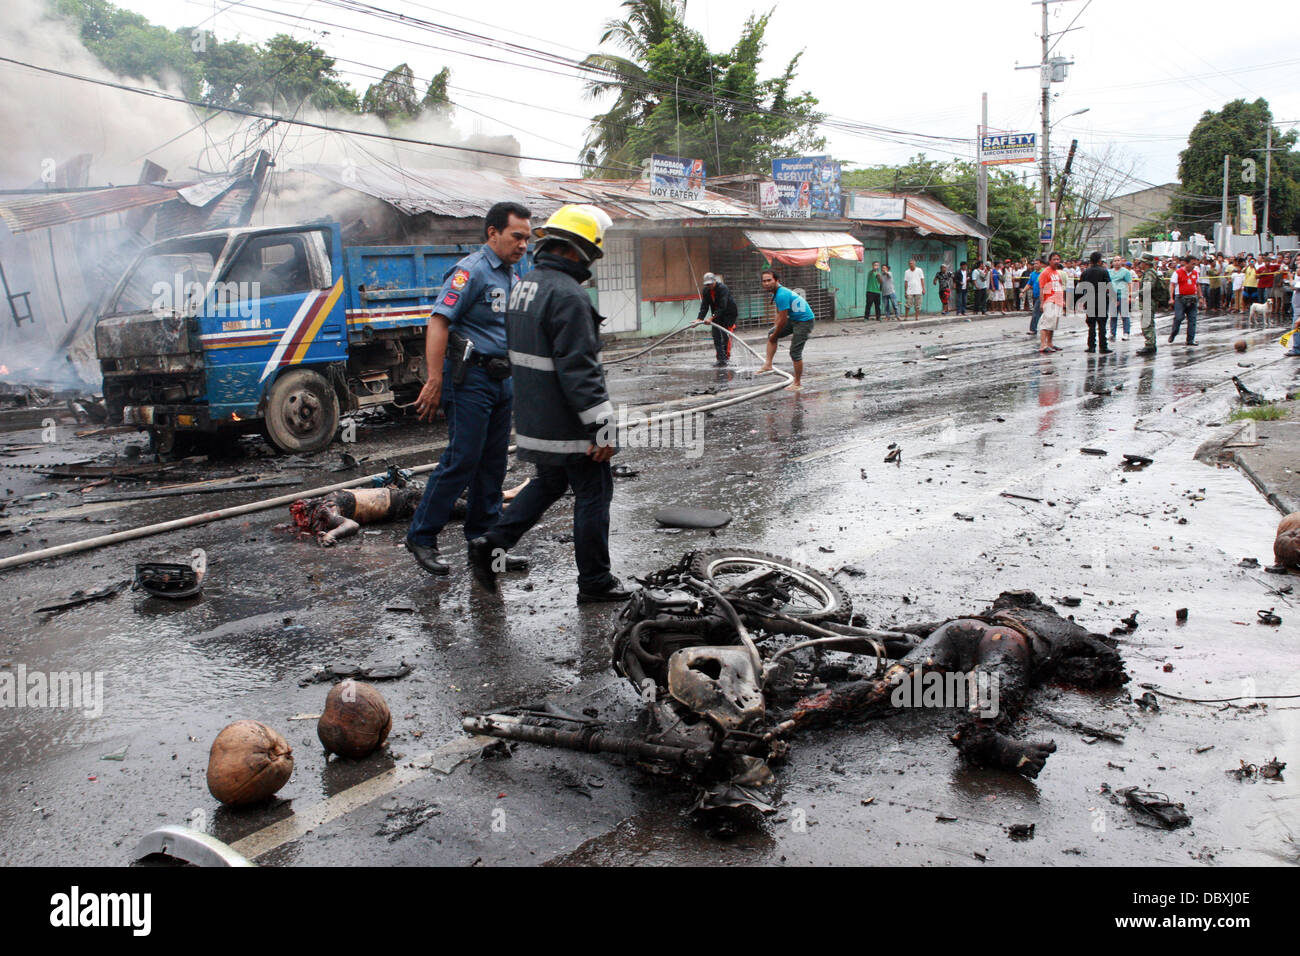 Cotabato, Philippines. 5th Aug, 2013. Bodies lay burnt in the street following a deadly car bomb explosion in the busy street of southern Philippine city of Cotabato. The deadly blast killed at least six people and wounded 29. It detonated as a car passed carrying a local official, who escaped unhurt. It was not clear if she was the target. Cotabato is on the island of Mindanao, which has been racked by a 40-year conflict between government forces and Islamist rebels. It is the second deadly bombing on Mindanao in 10 days. Stock Photo